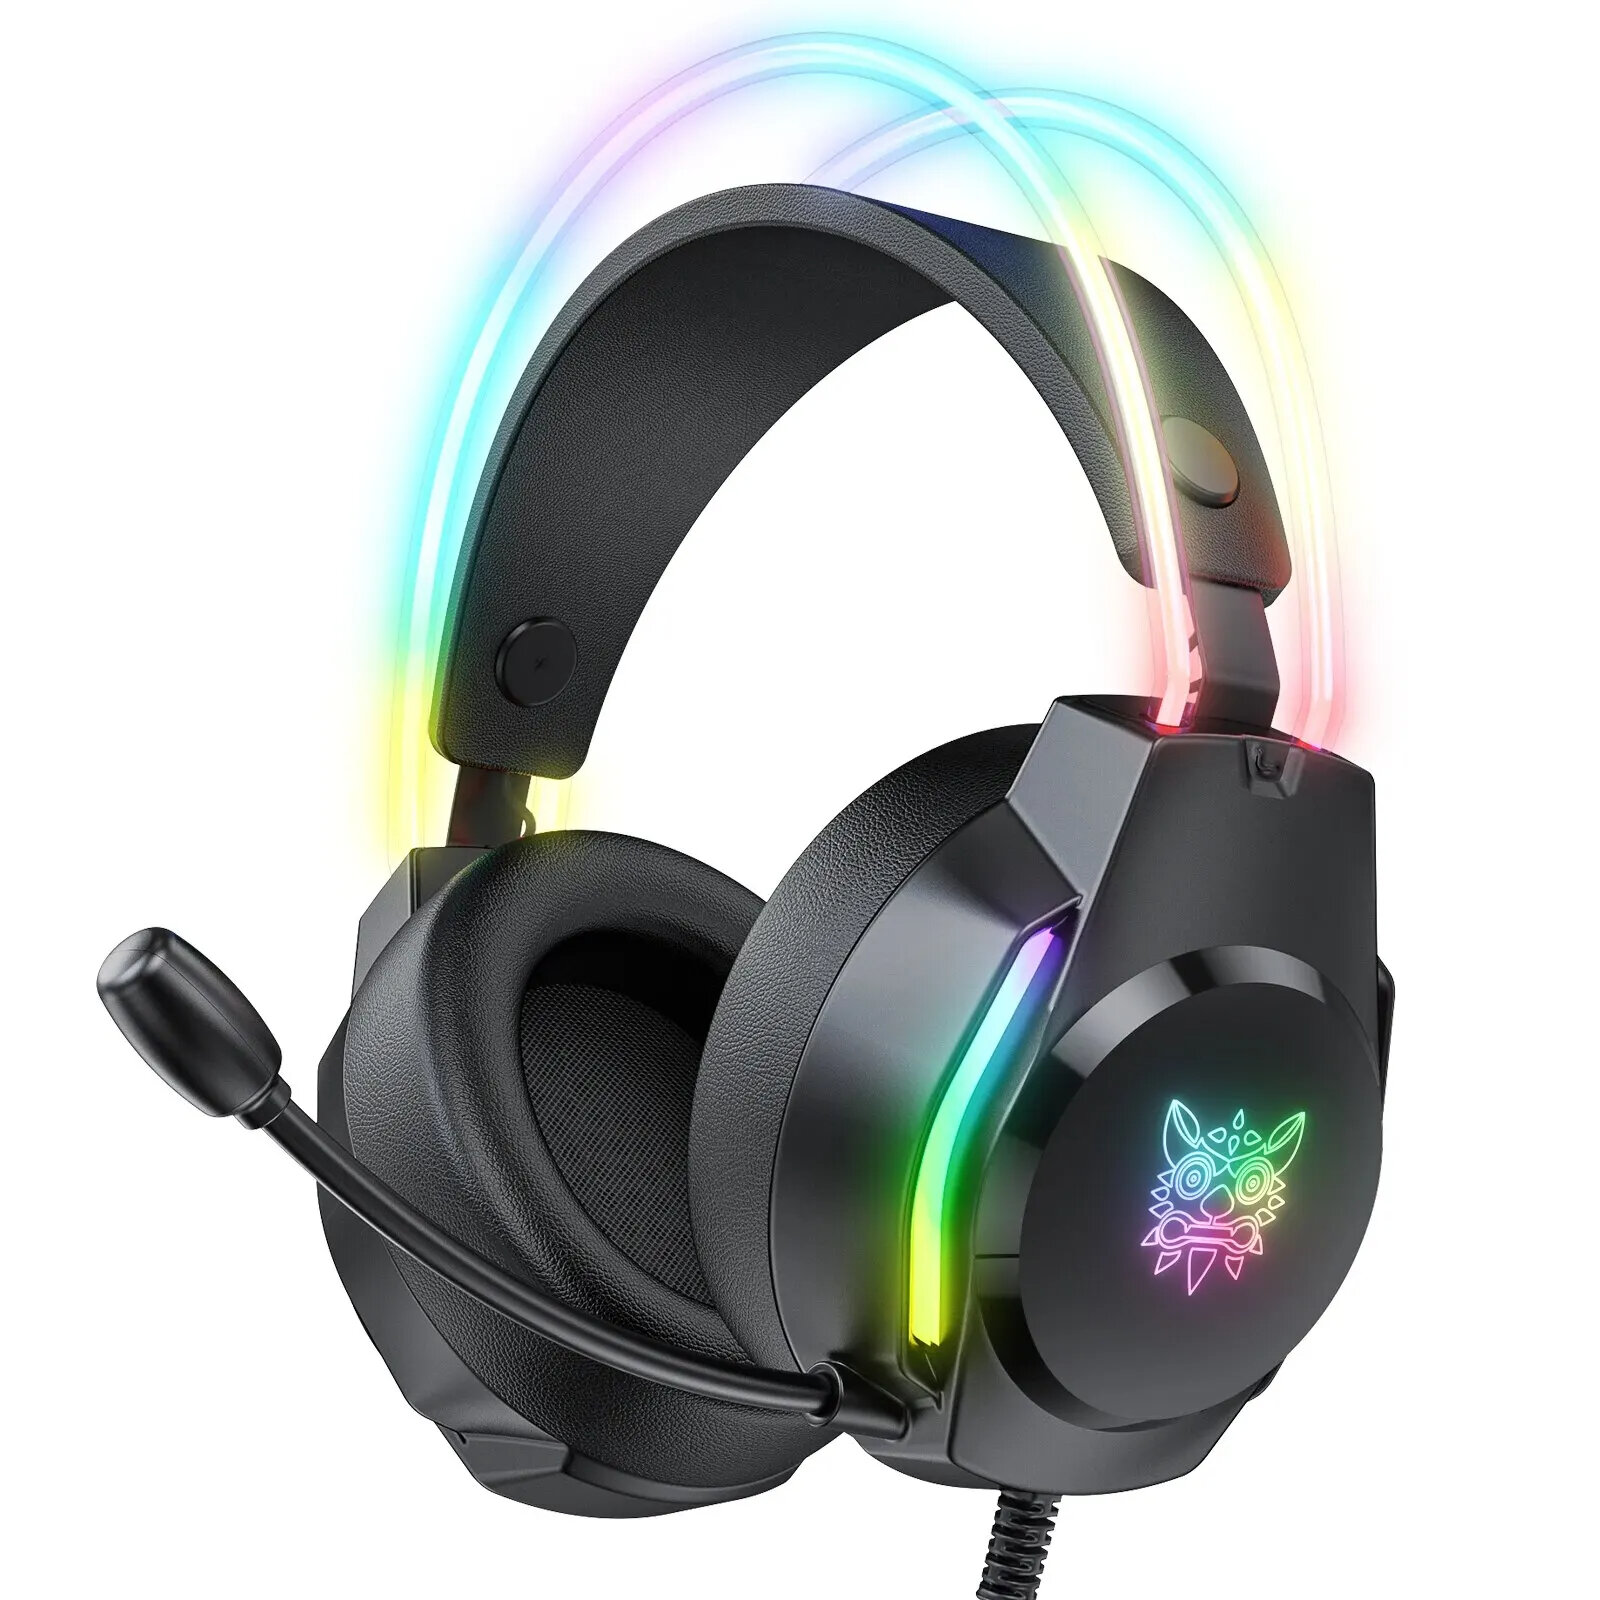 

ONIKUMA X26 Gaming Headset Wired Headphones 50mm Driver Unit Stereo Surround Sound RGB Light Flexible Microphone Earphon